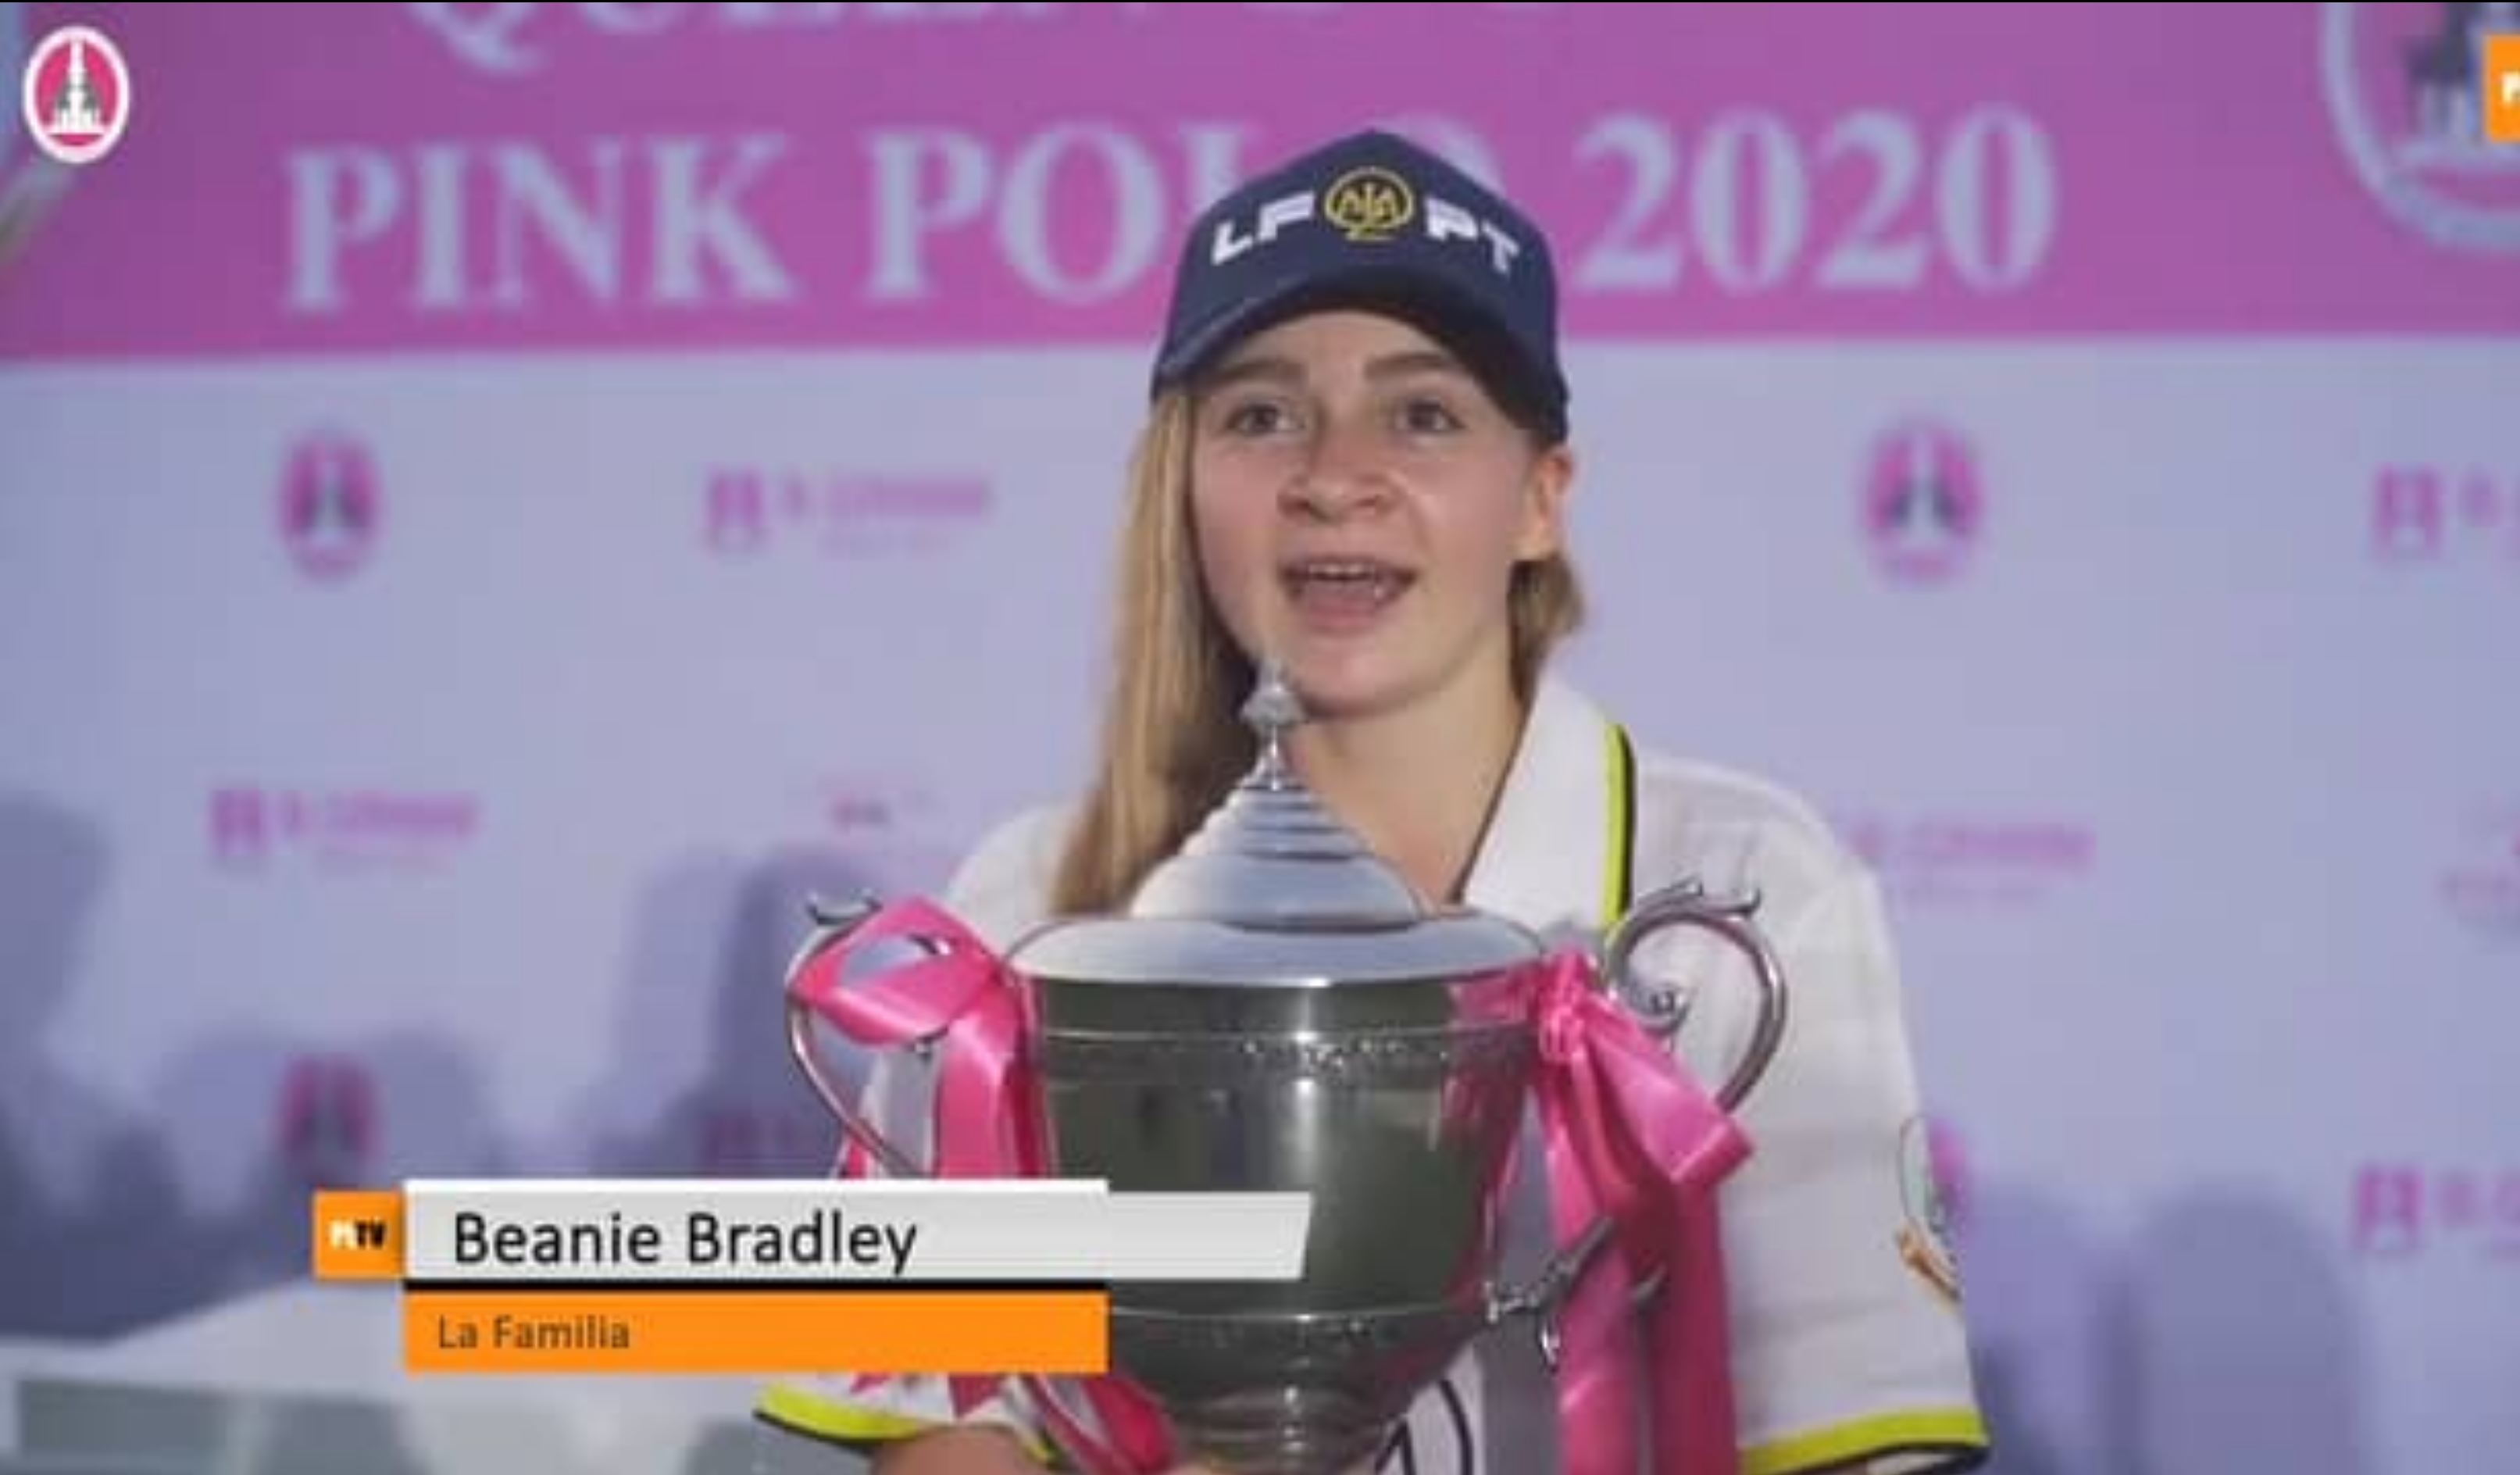 Interview with Beanie Bradley after Pink Polo